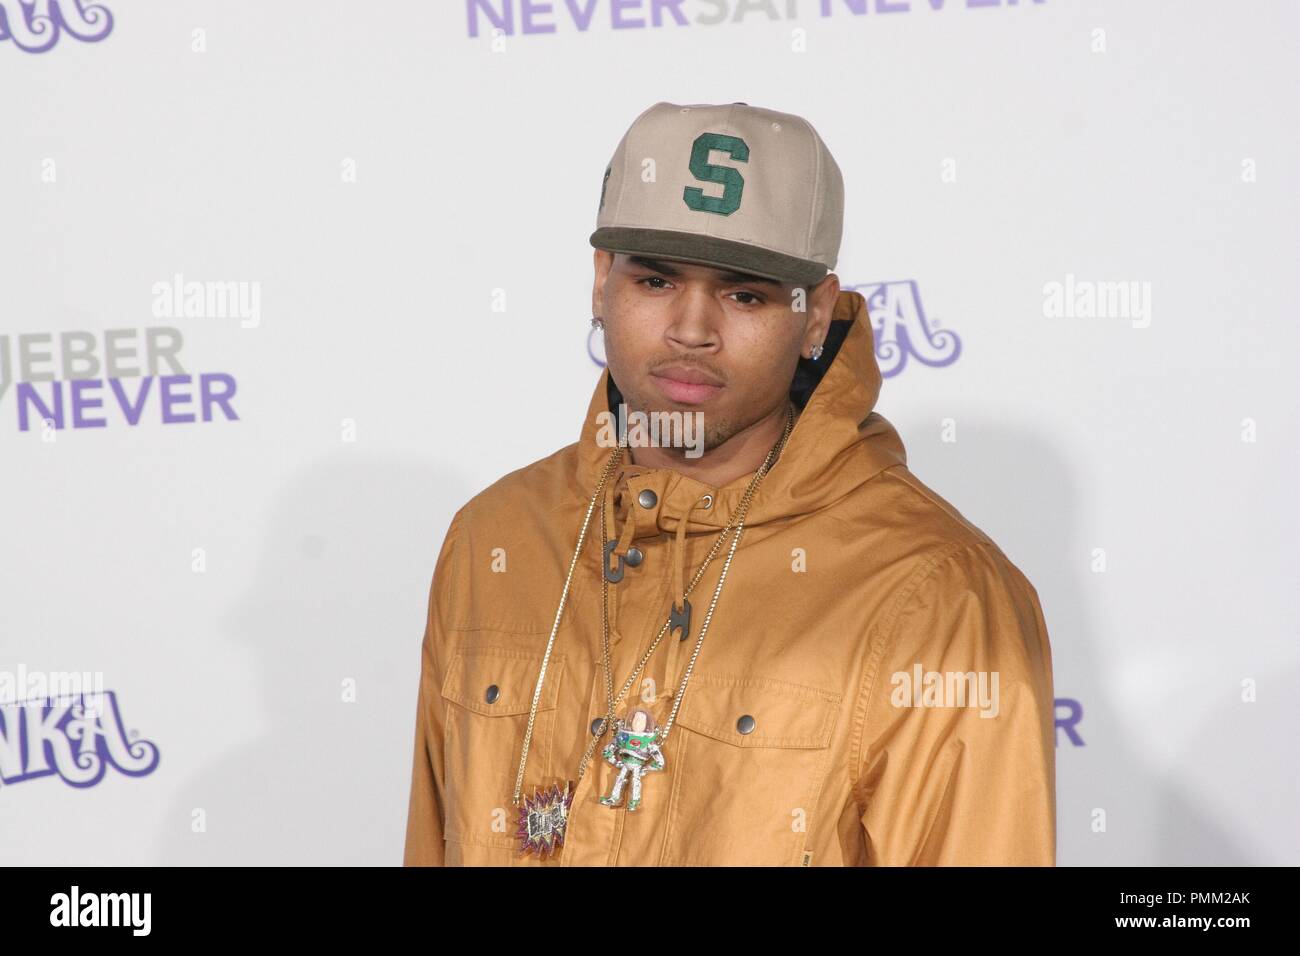 Chris Brown at the Los Angeles Premiere of Paramount Pictures' "Justin Bieber: Never Say Never". Arrivals held at Nokia Theater L.A. Live in Los Angeles, CA. February 8, 2011. Photo by: Richard Chavez / PictureLux Stock Photo